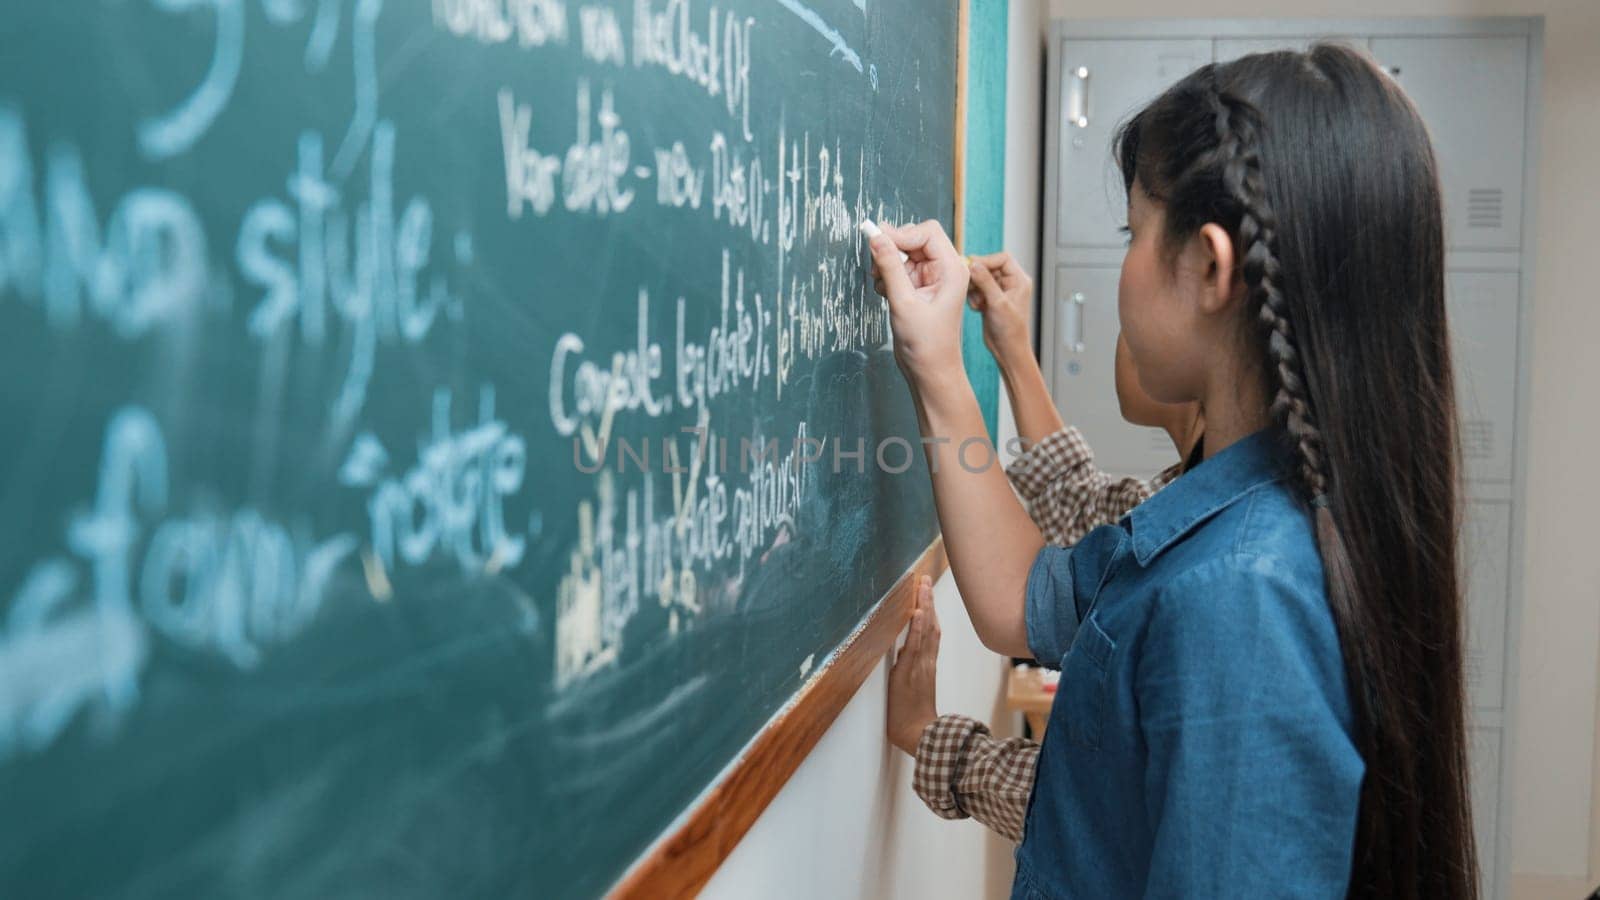 Skilled asian girl writing engineering prompt and programing system while standing blackboard with generated AI prompt written by diverse smart student at STEM technology lesson. Education. Pedagogy.